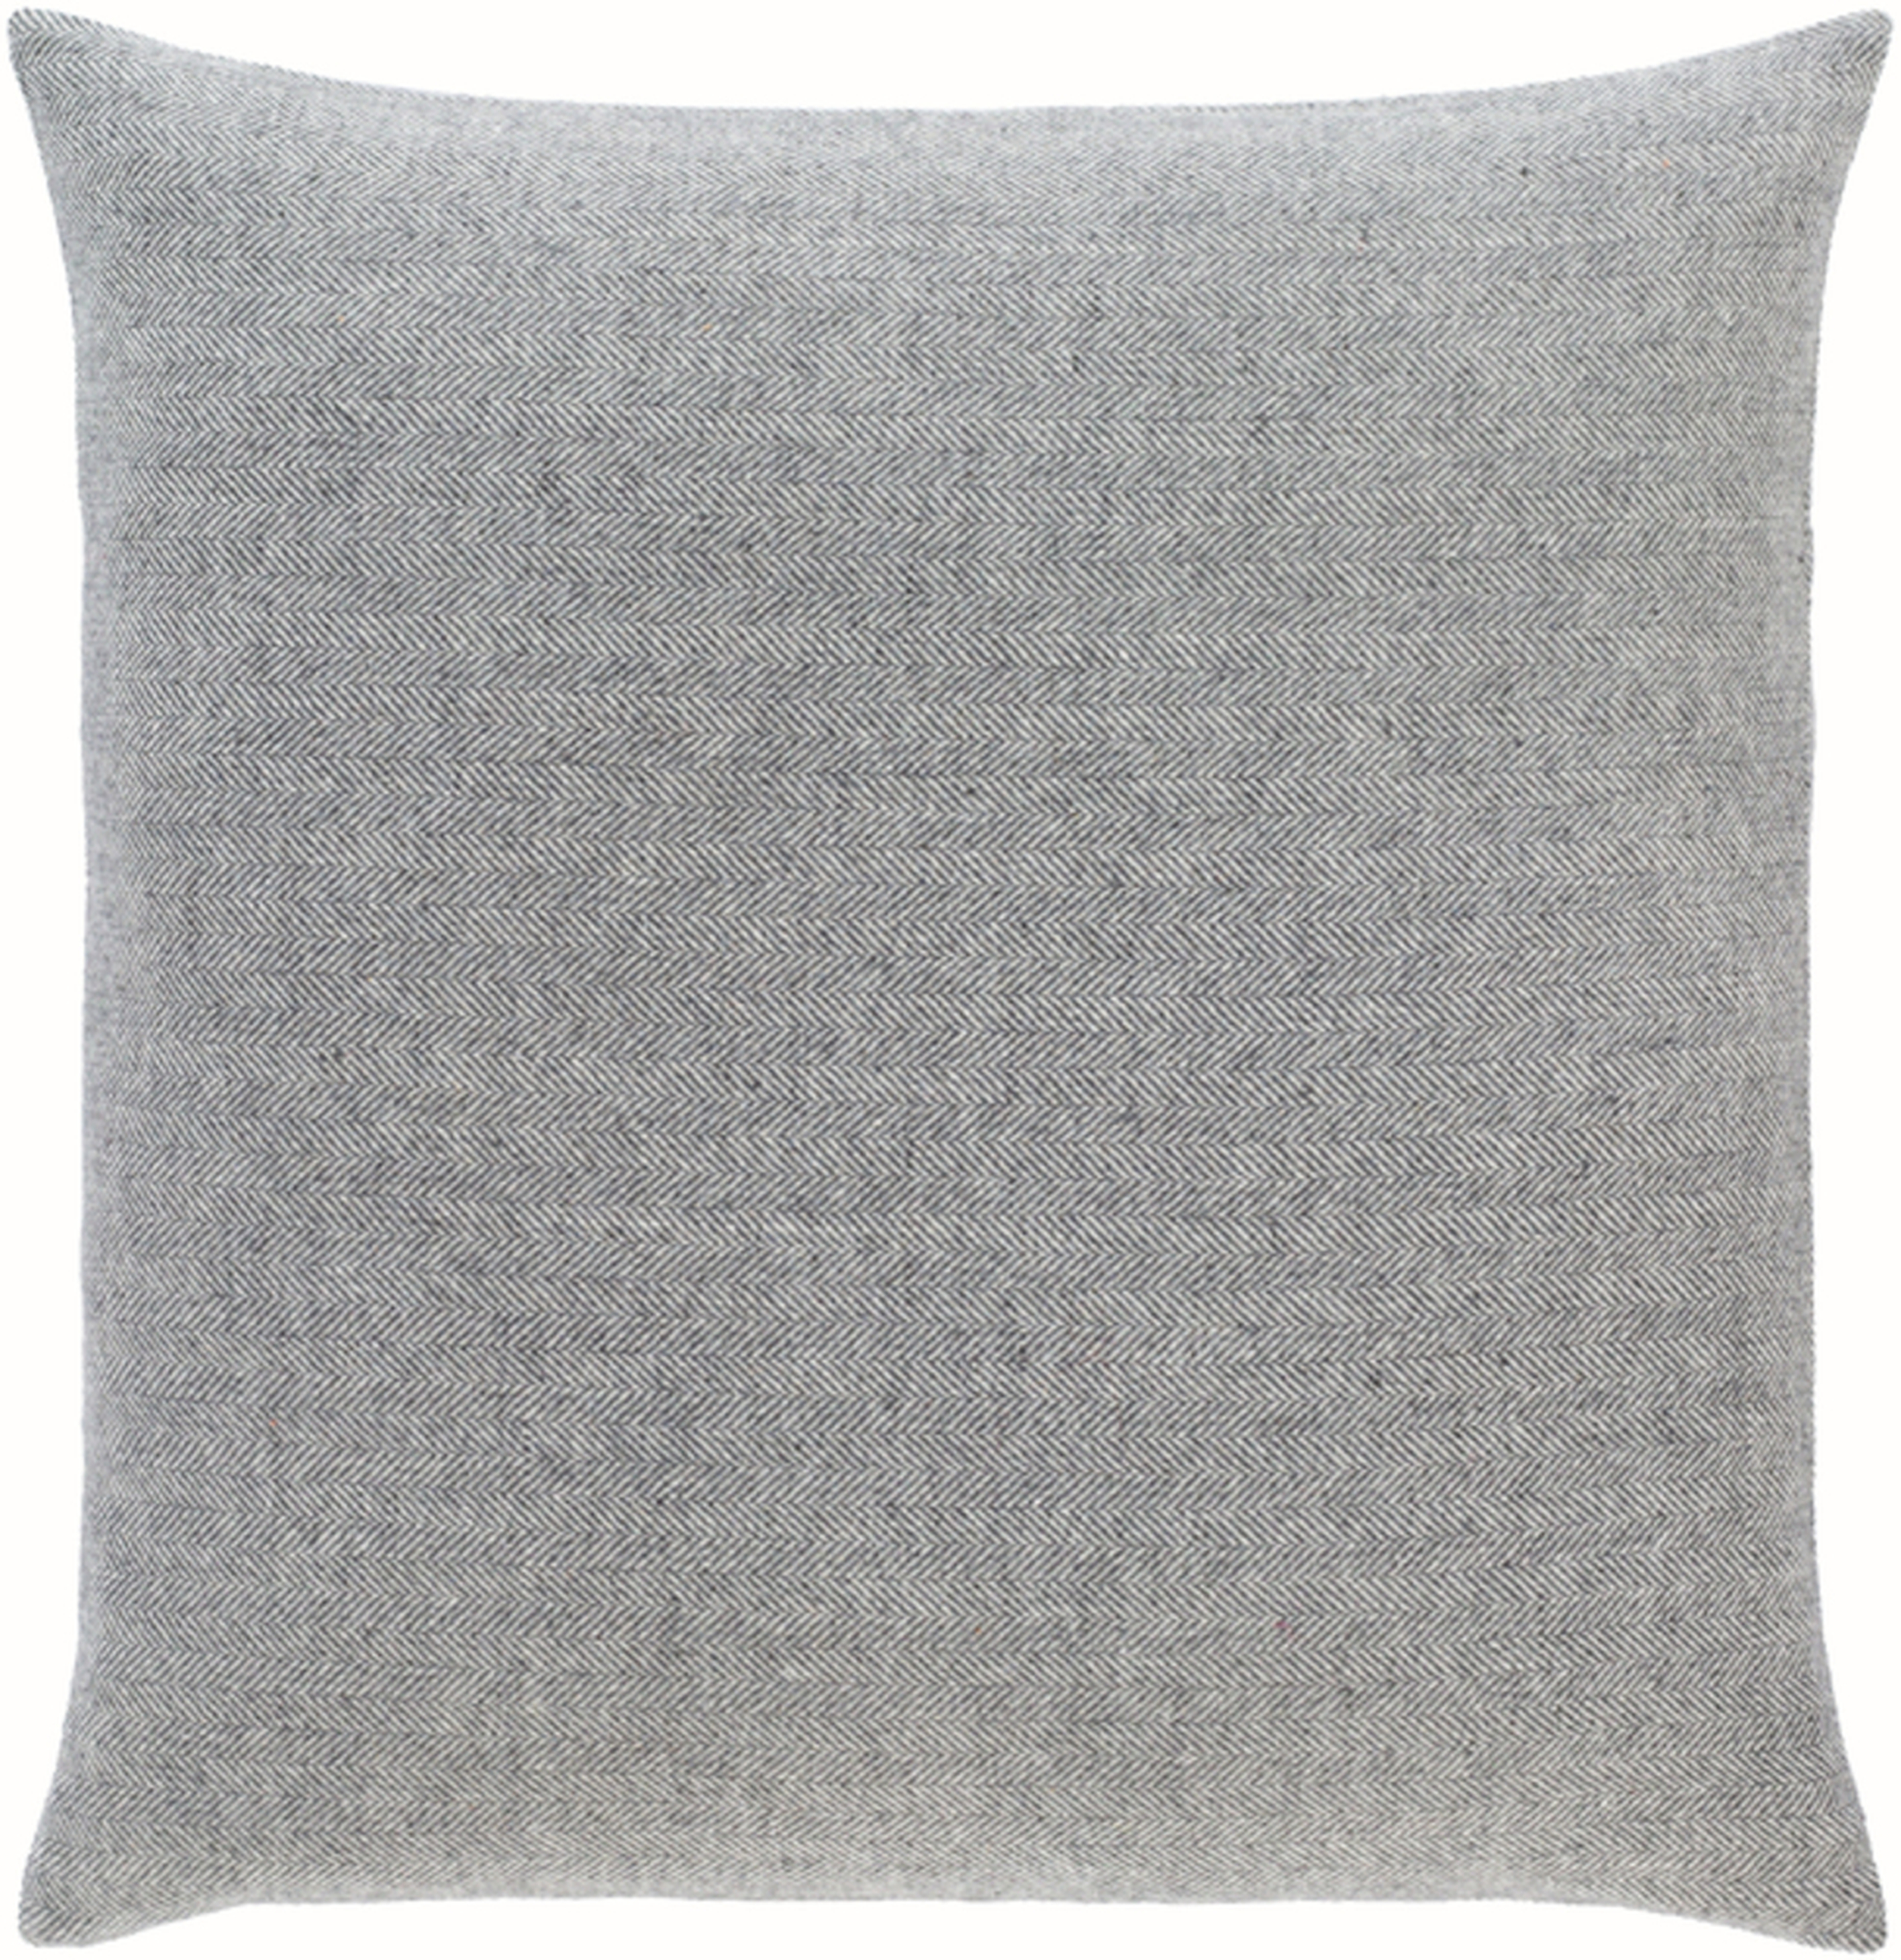 Wells Pillow Cover, 18" x 18", Charcoal - Cove Goods